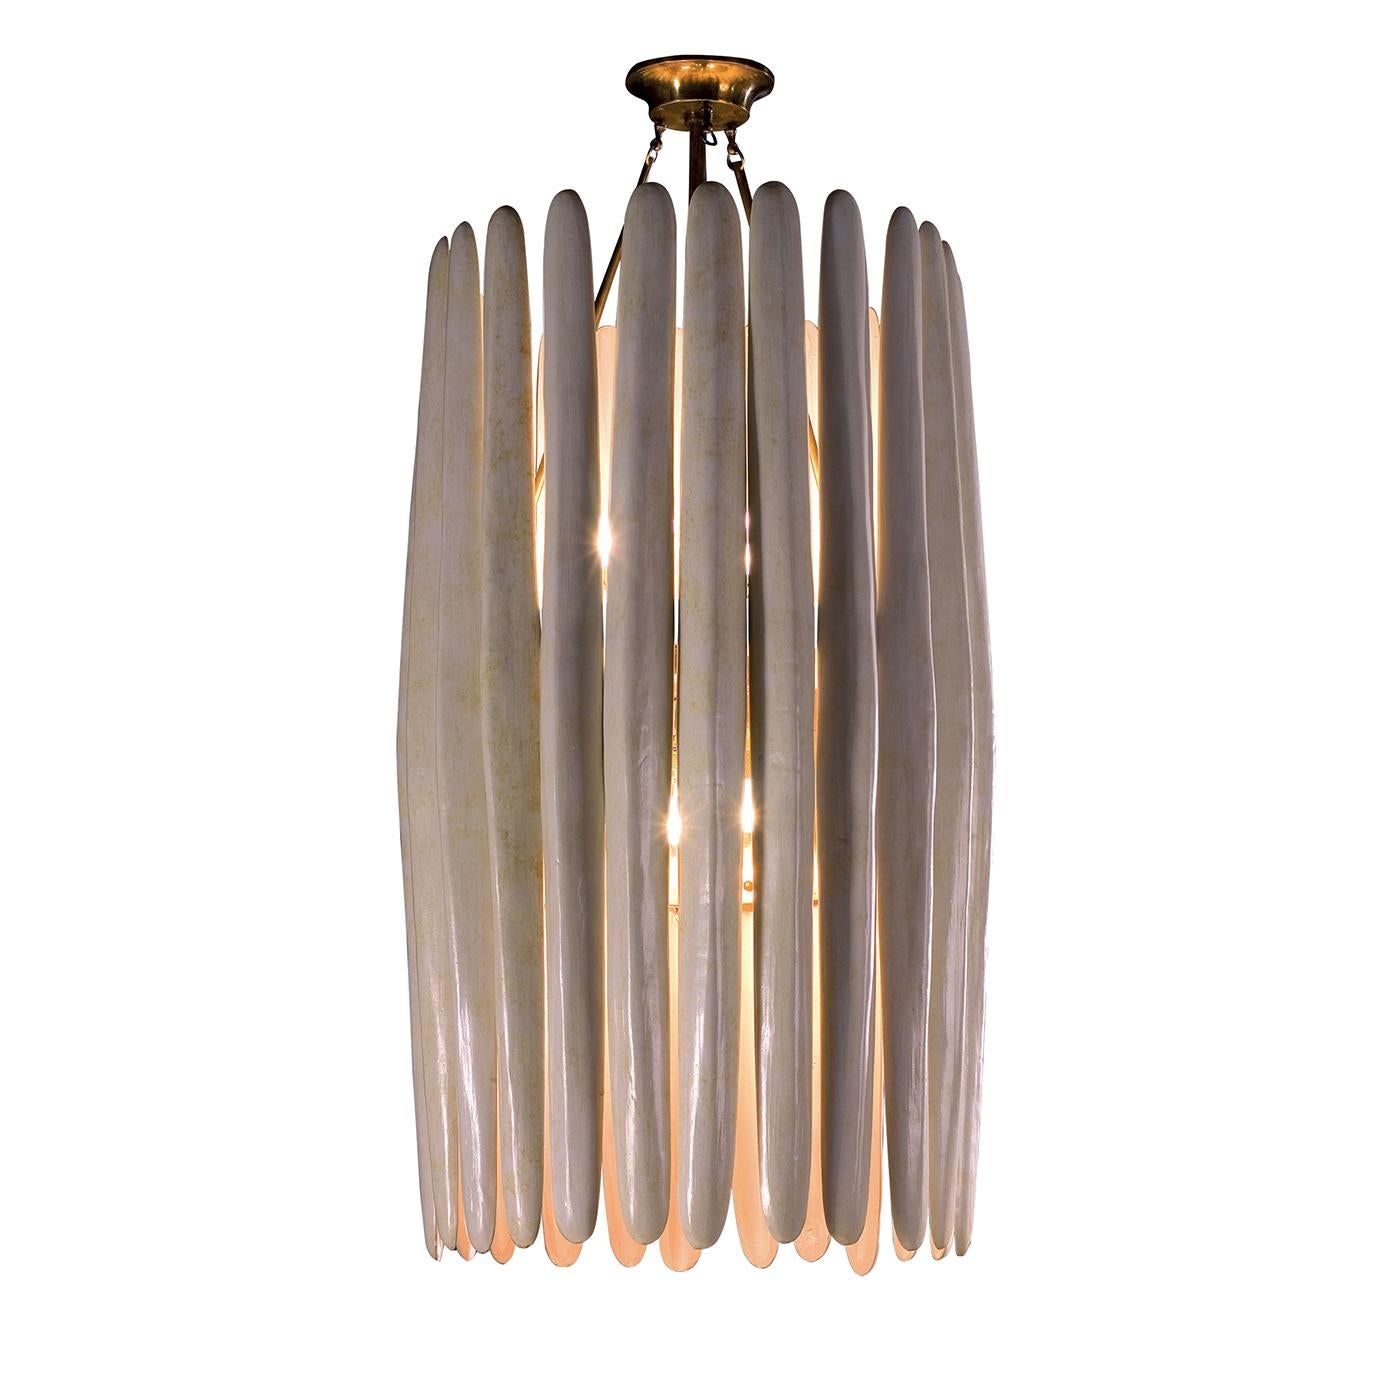 This chandelier is a work of true hand-craftsmanship of very high-quality. The cylindrical shade surrounding the illuminating element of this piece was crafted using a series of connecting elongated majolica elements, crafted by hand and glazed in